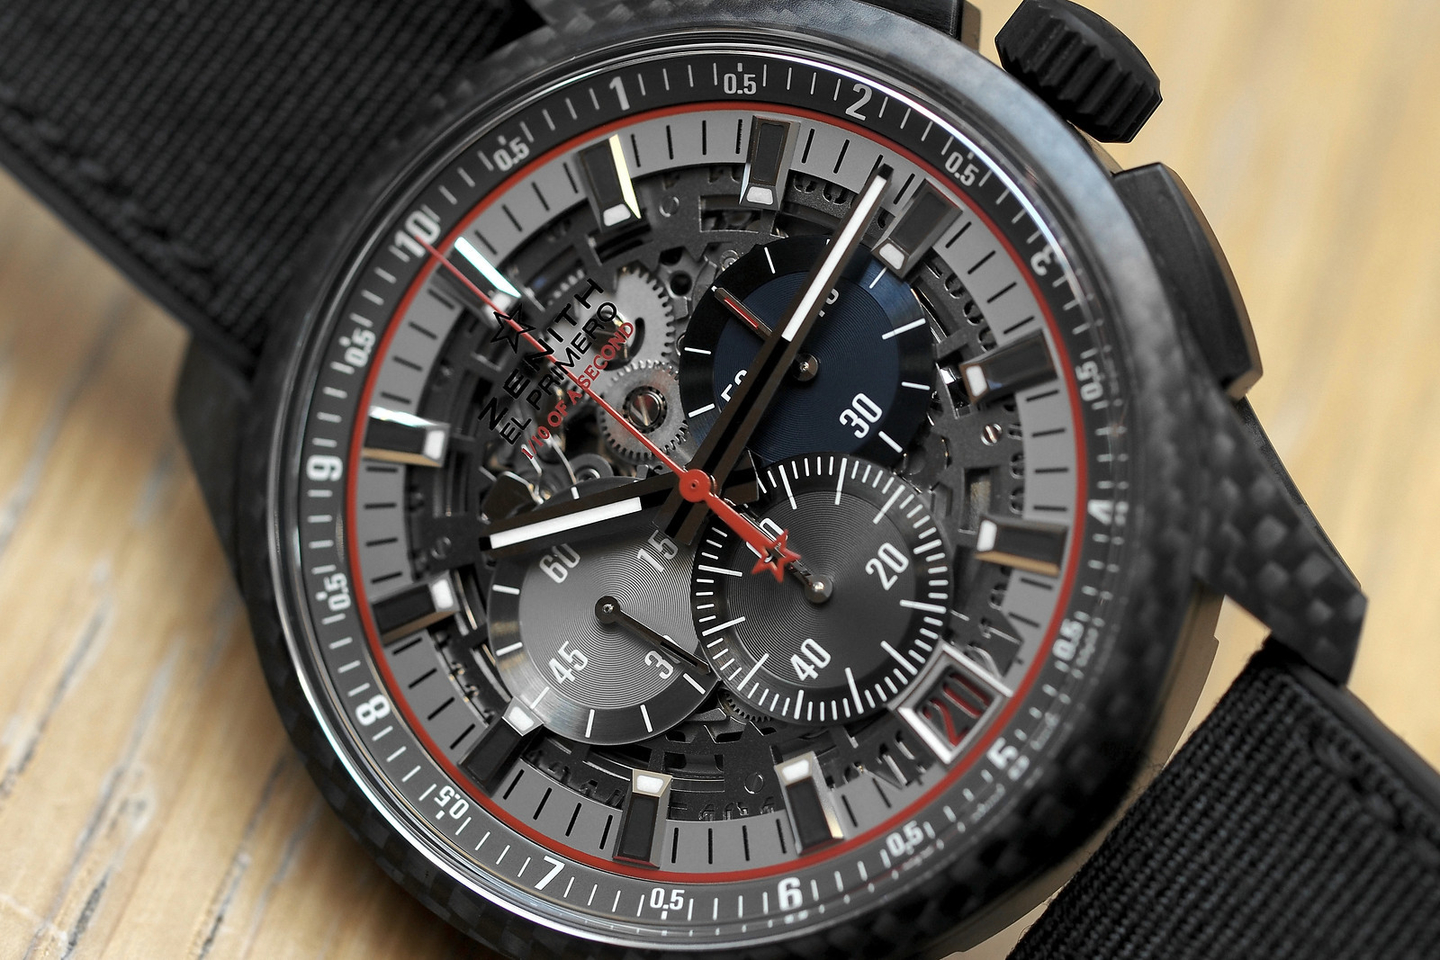 Hands-On with the Zenith El Primero Lightweight Striking 10th Chronograph